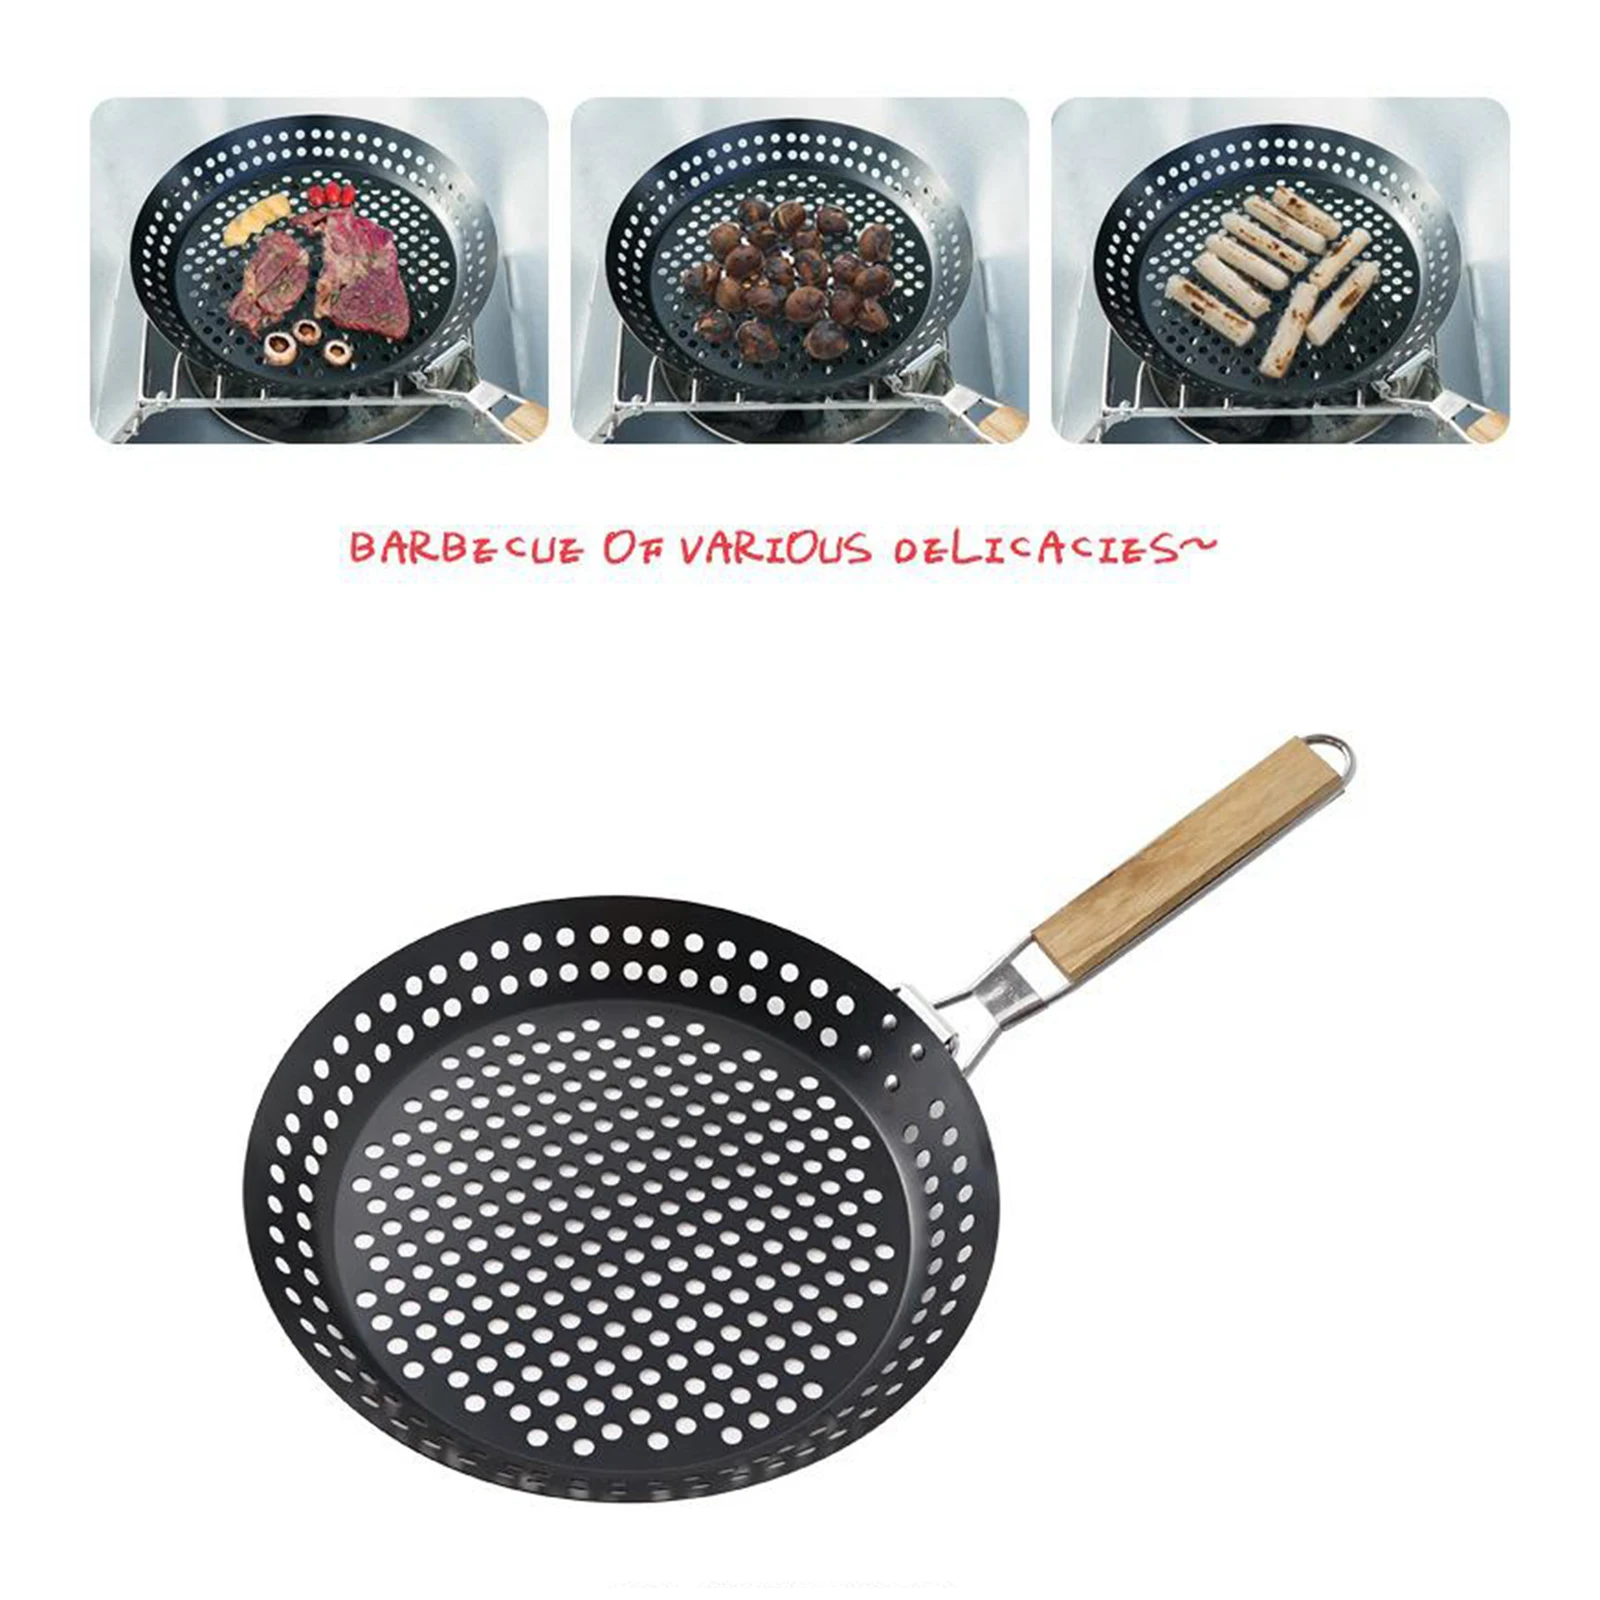 Round Bakeware Plate Folding Grill Pan Camping Barbecue Home Tray Basket